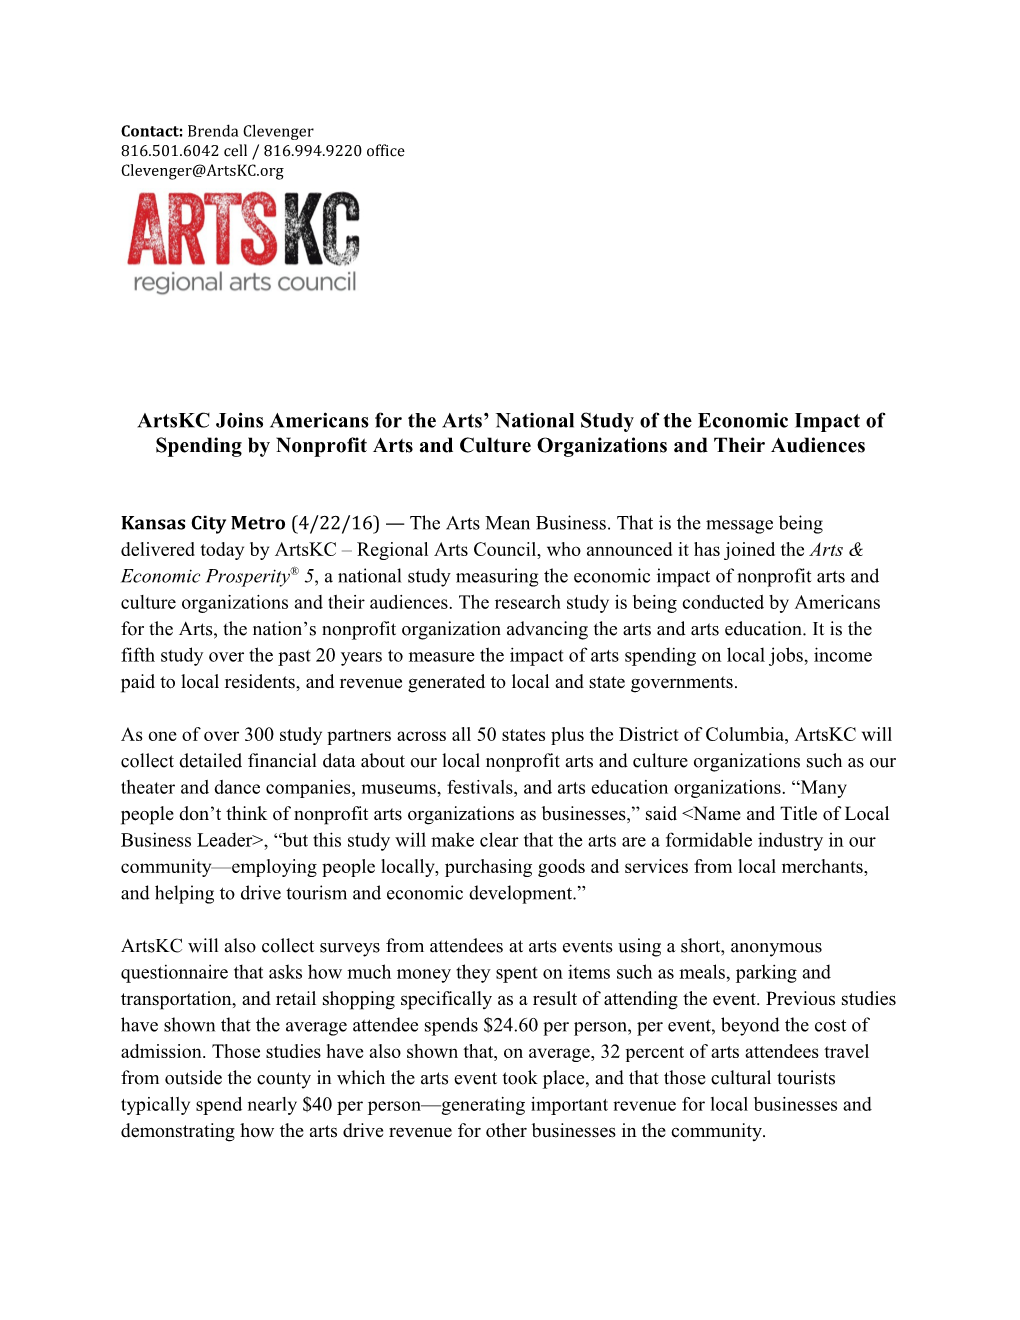 Artskc Joins Americans for the Arts National Study of the Economic Impact of Spending